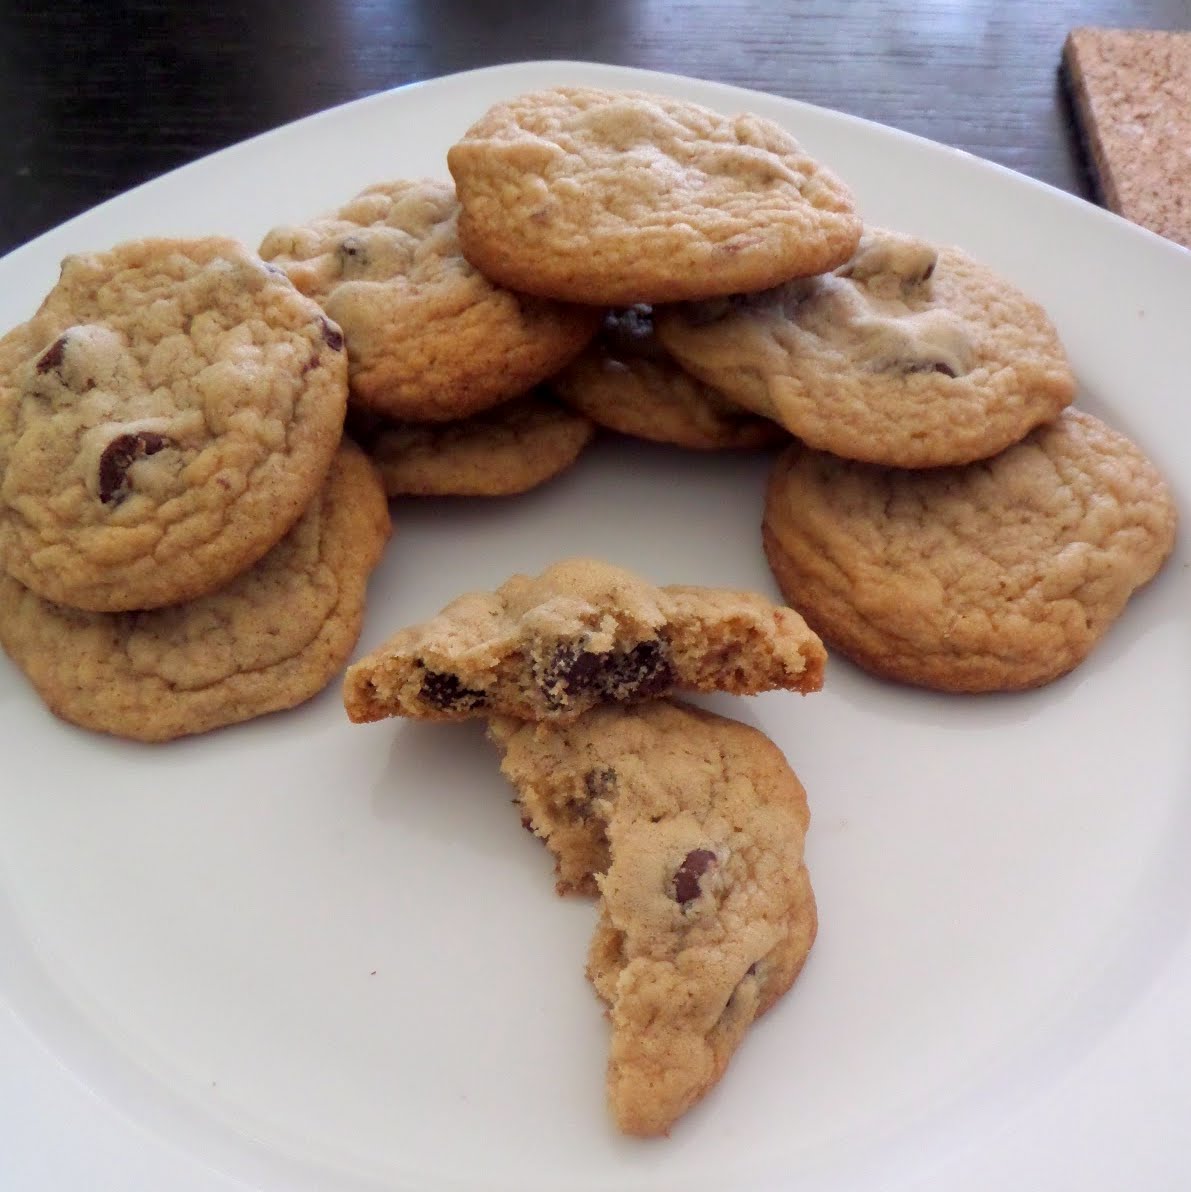 Chocolate Chip Cookies:  soft and chewy cookies studded with semisweet chocolate chips.